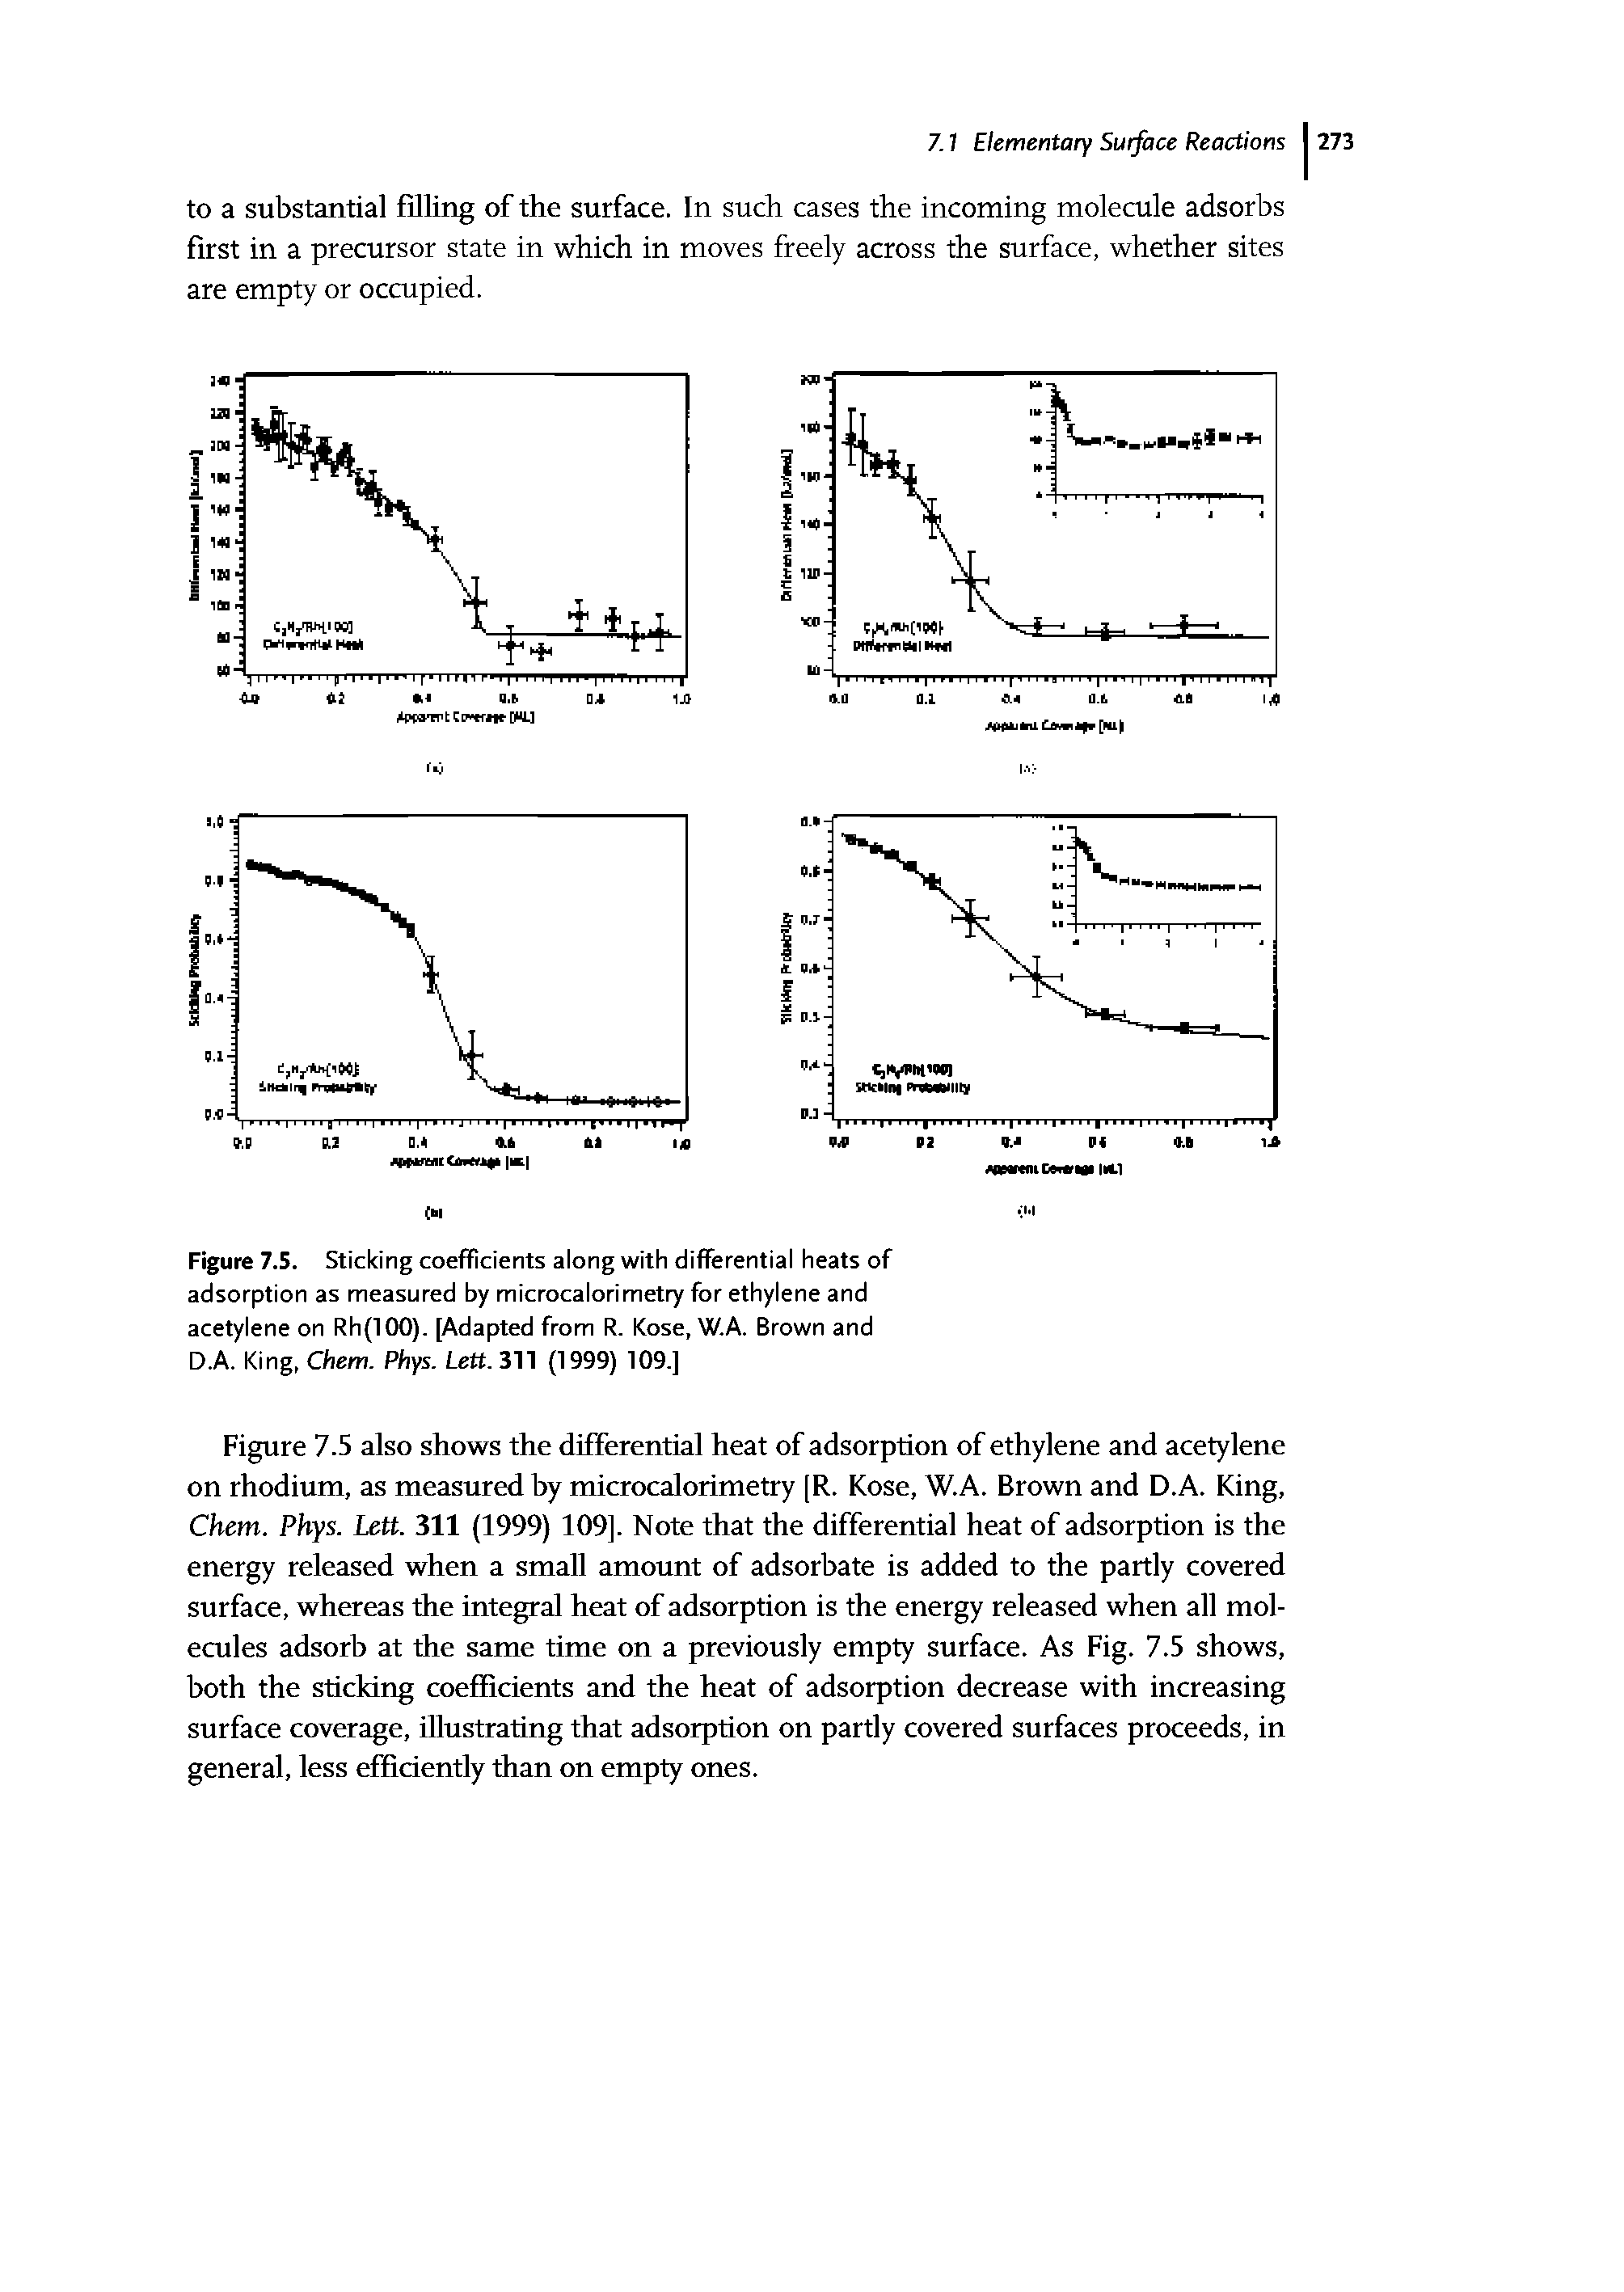 Figure 7.5. Sticking coefficients along with differential heats of adsorption as measured by microcalorimetry for ethylene and acetylene on Rh(lOO). [Adapted from R. Kose, W.A. Brown and D.A. King, Chem. Rhys. Lett. 311 (1999) 109.]...